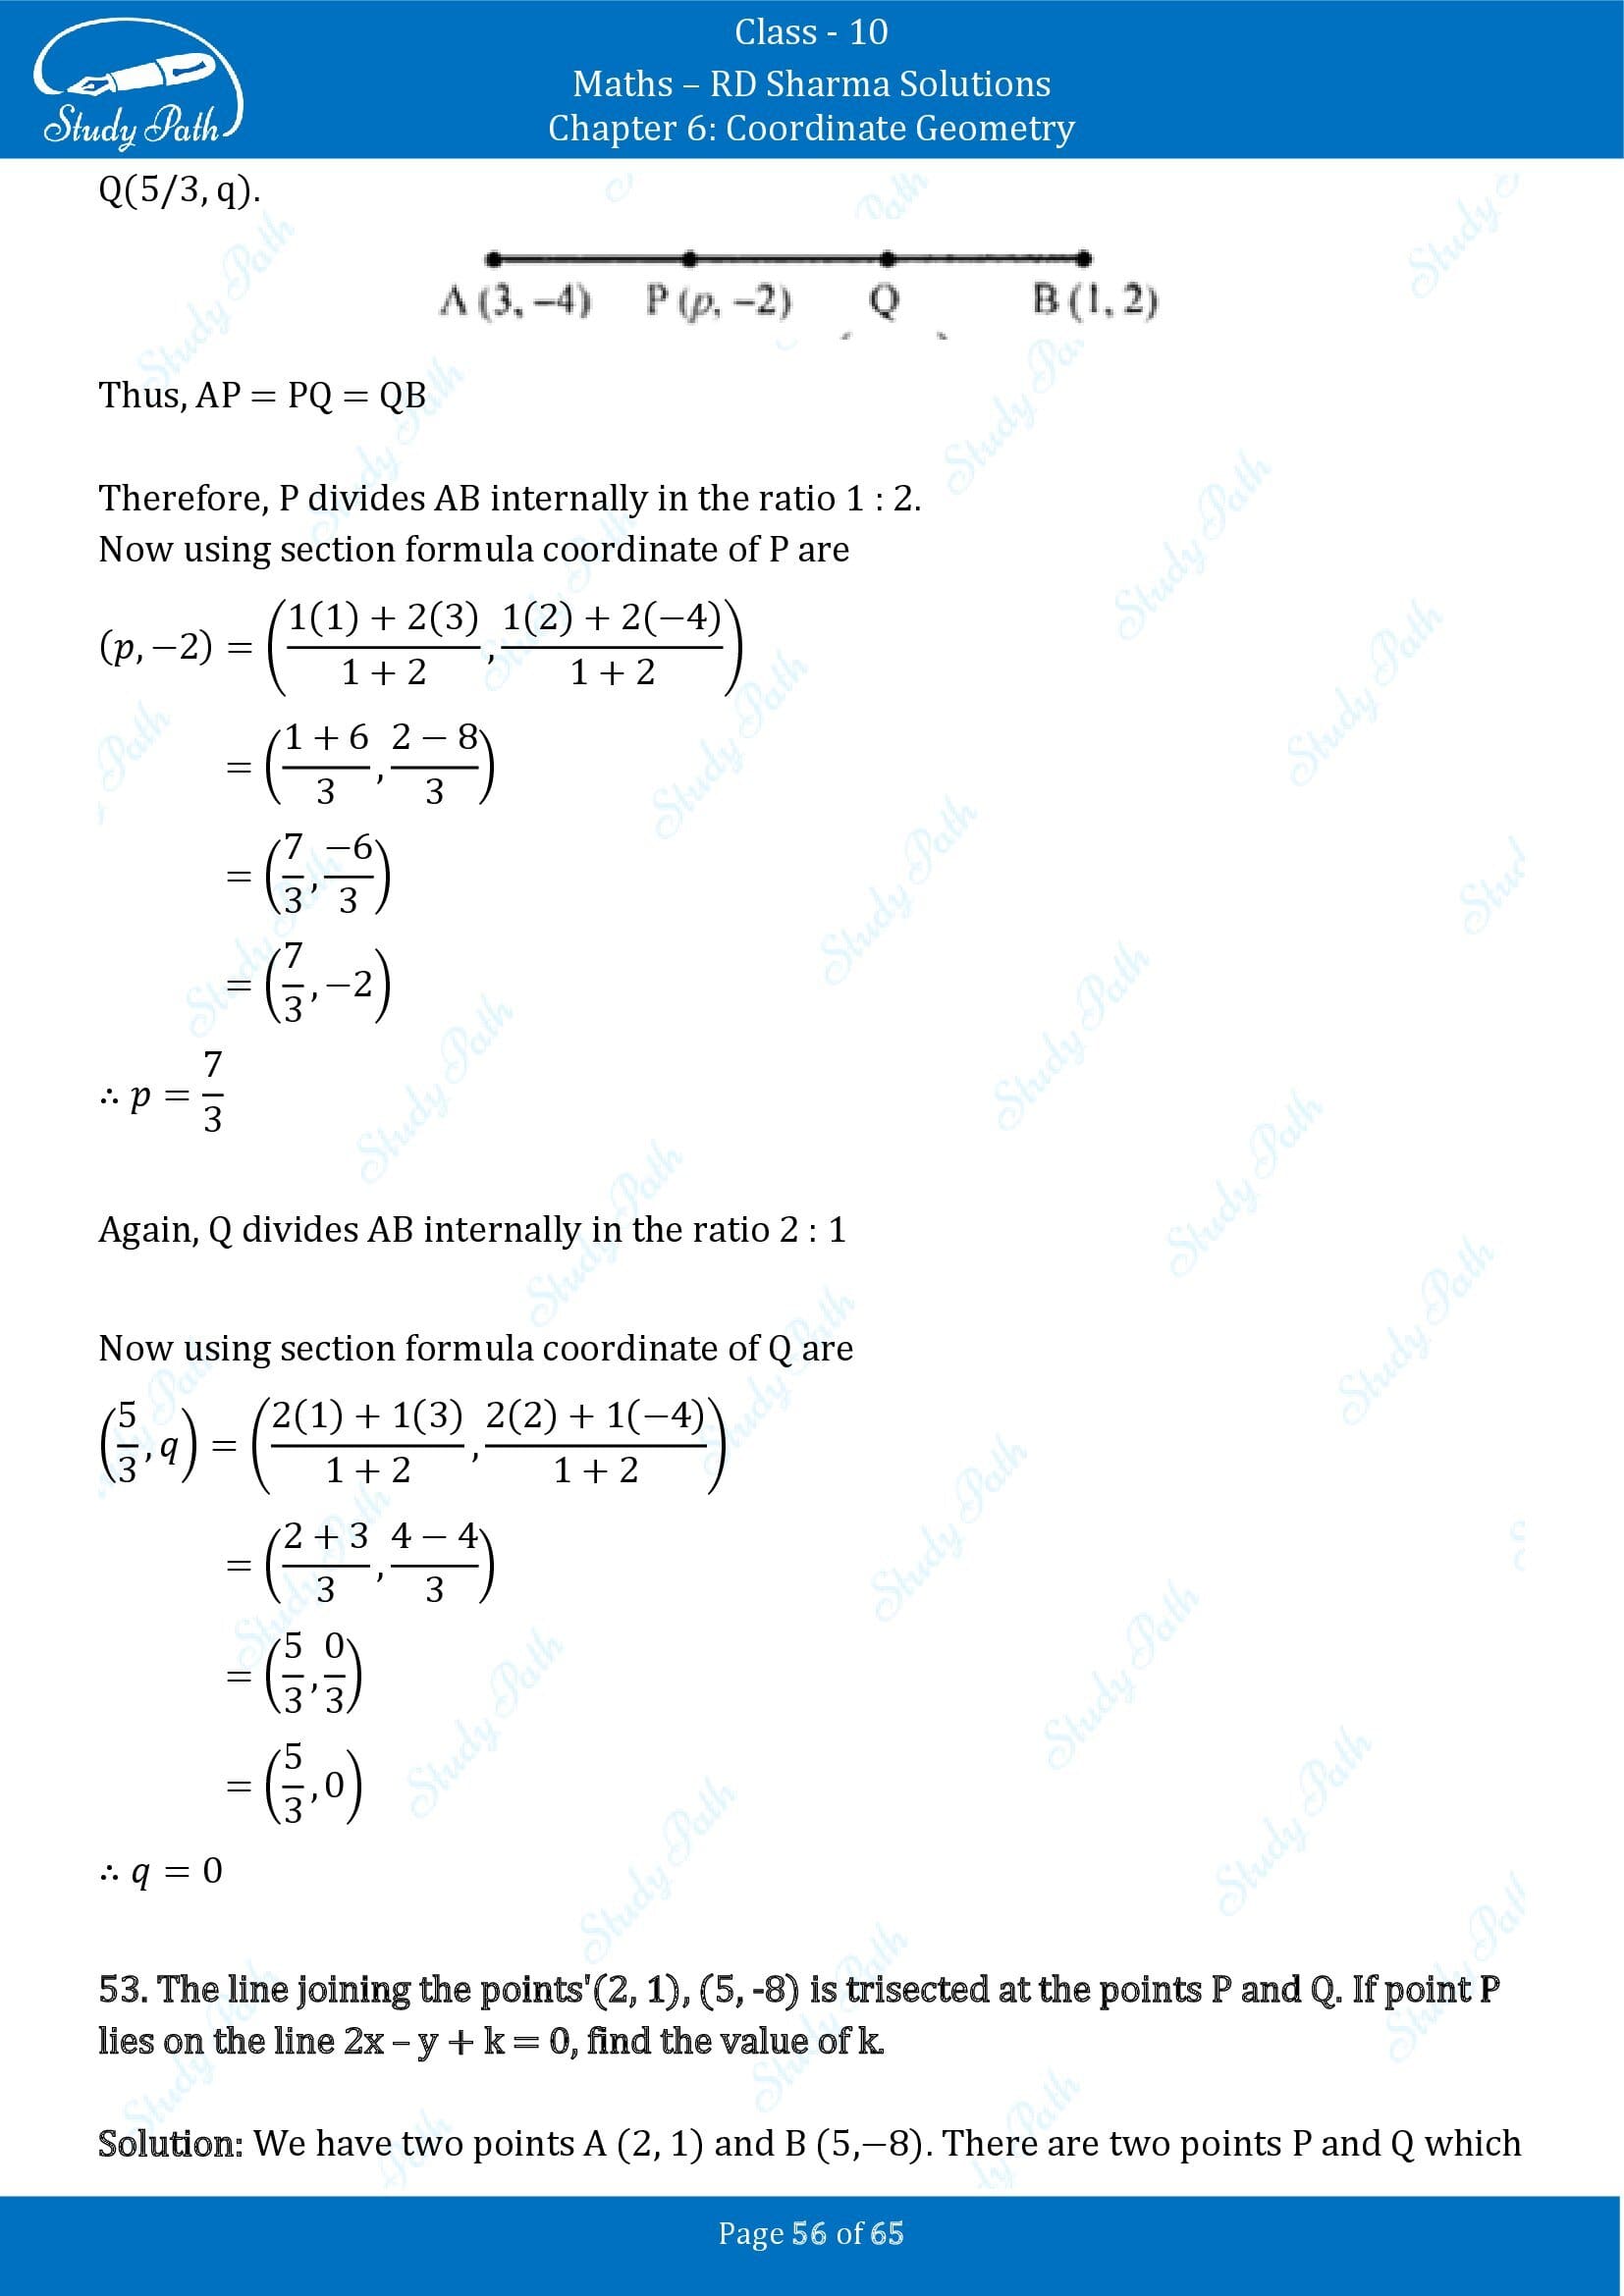 RD Sharma Solutions Class 10 Chapter 6 Coordinate Geometry Exercise 6.3 00056